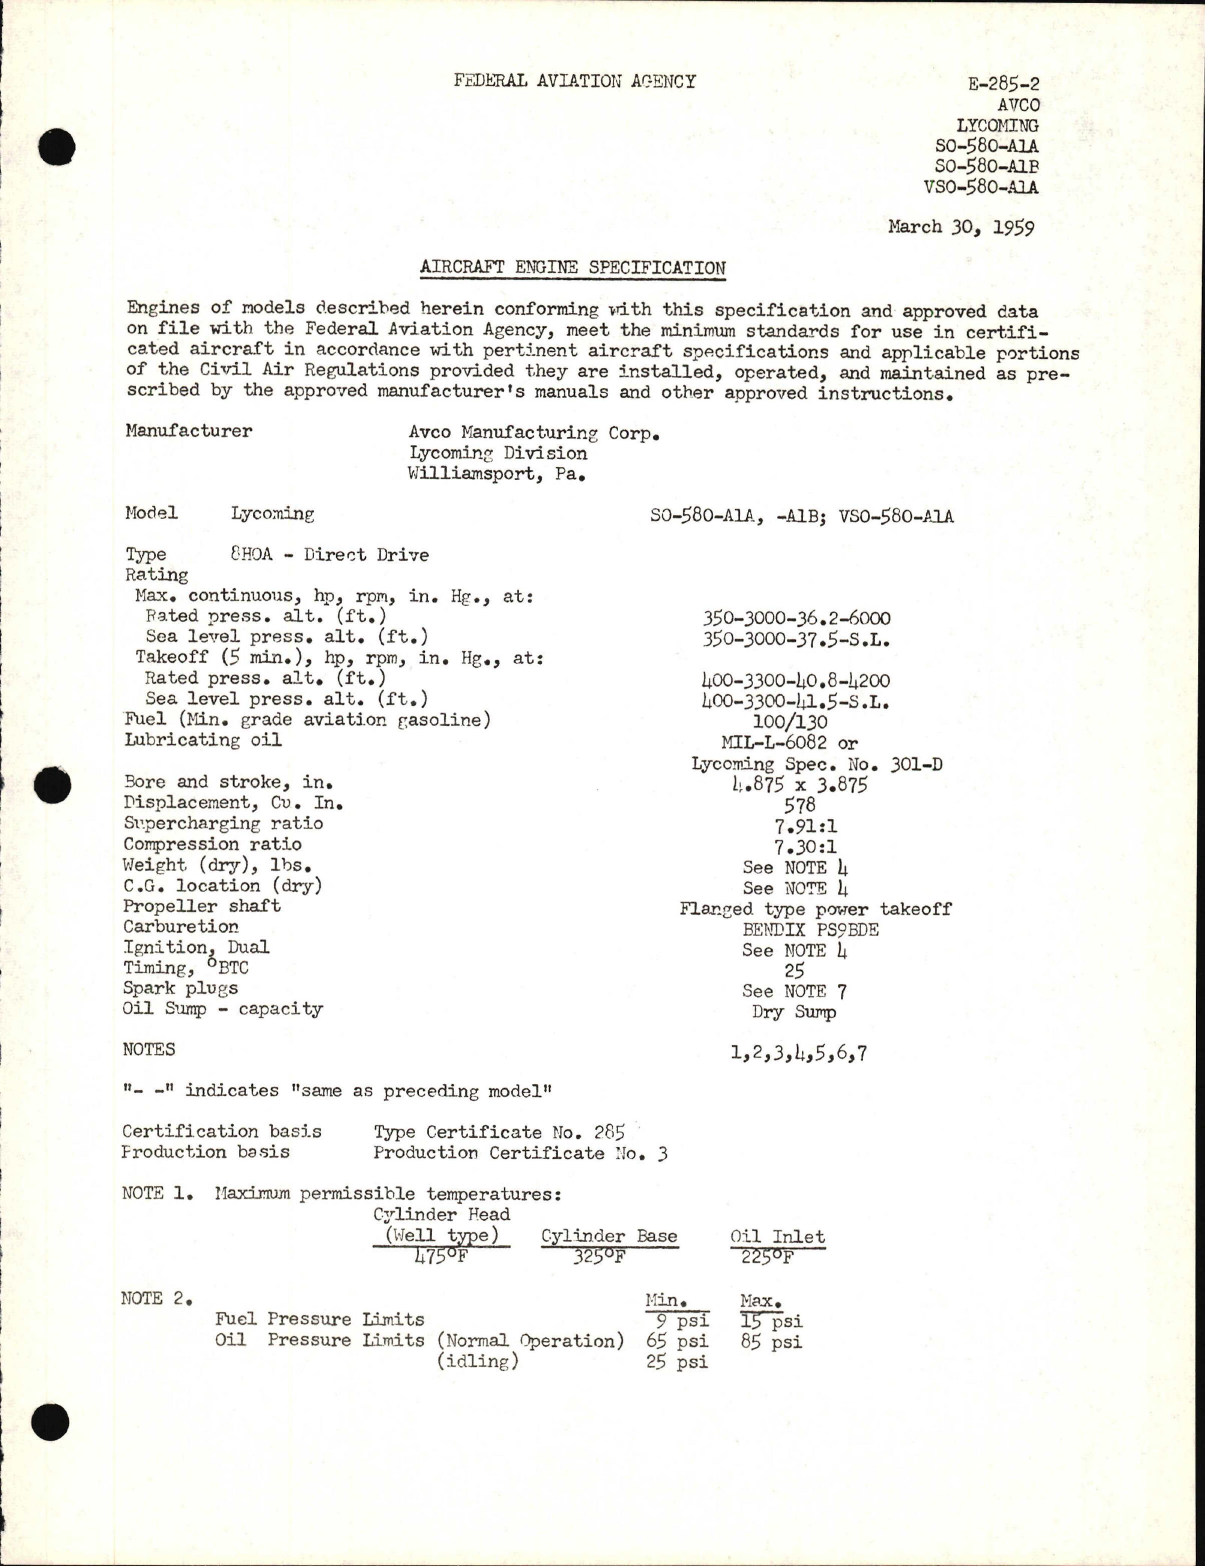 Sample page 1 from AirCorps Library document: SO-580-A1A, SO-580-A1B, and VSO-580-A1A